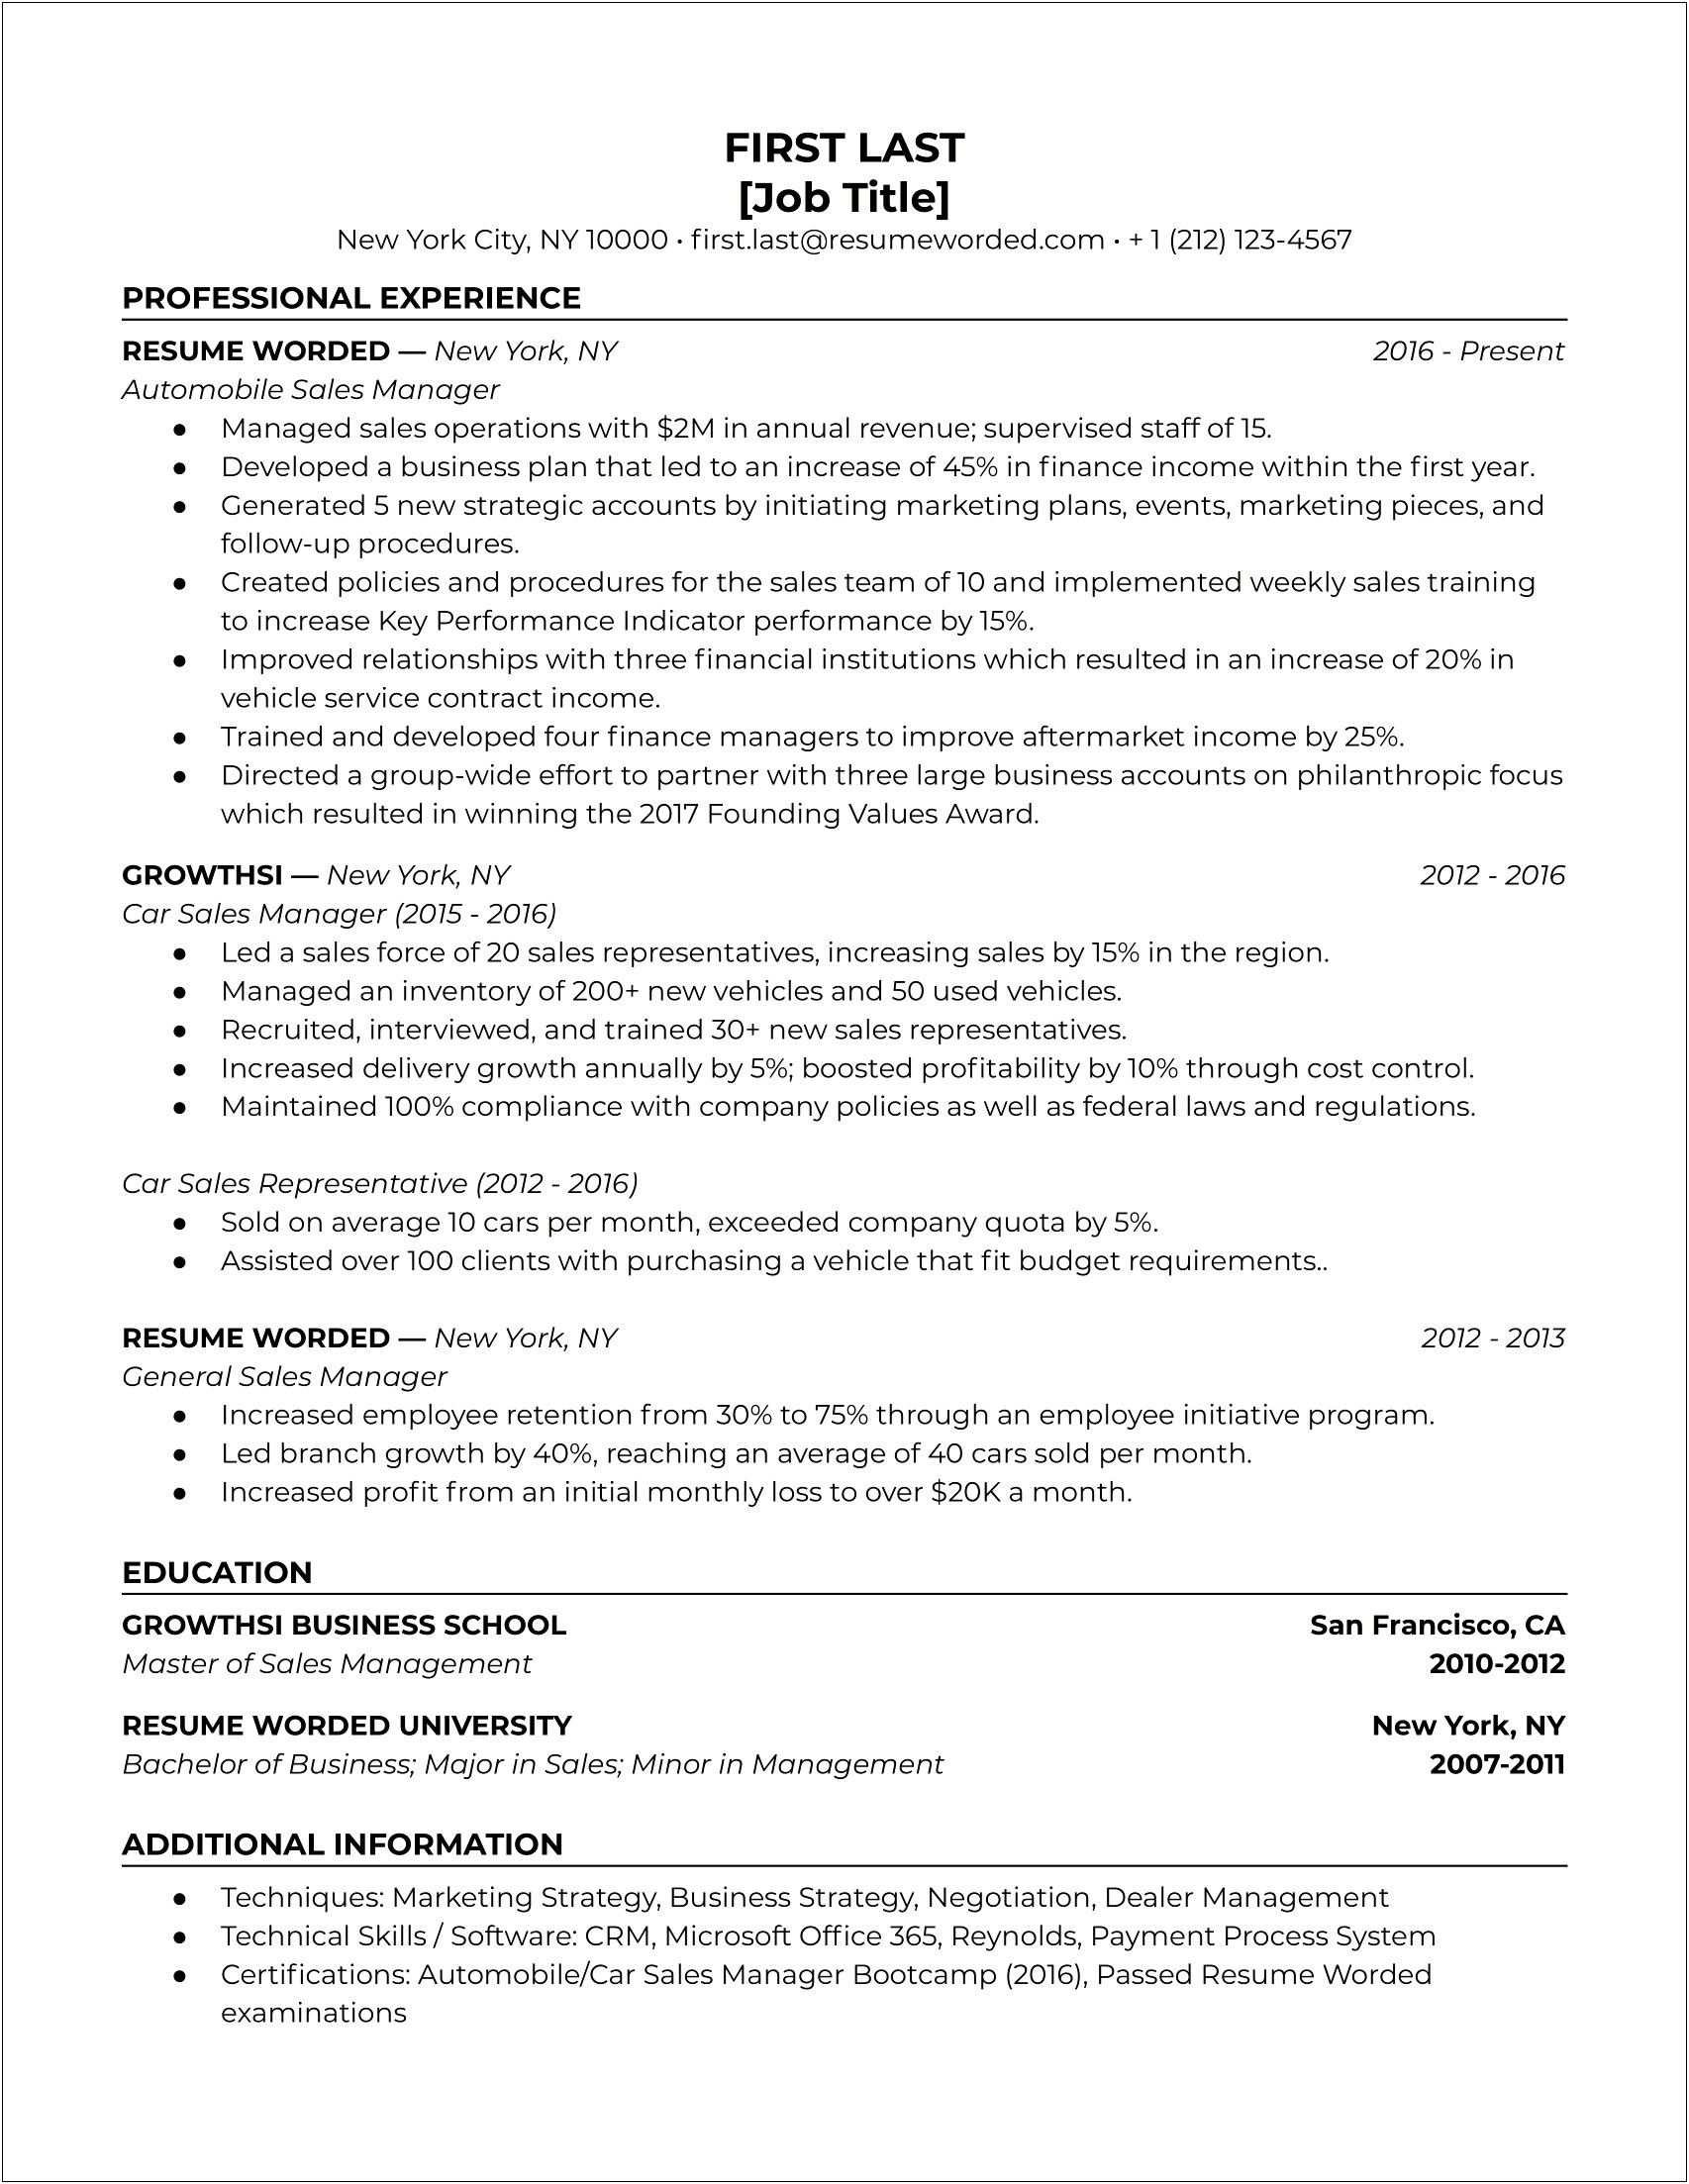 Resume Summary For Inside Sales Rep